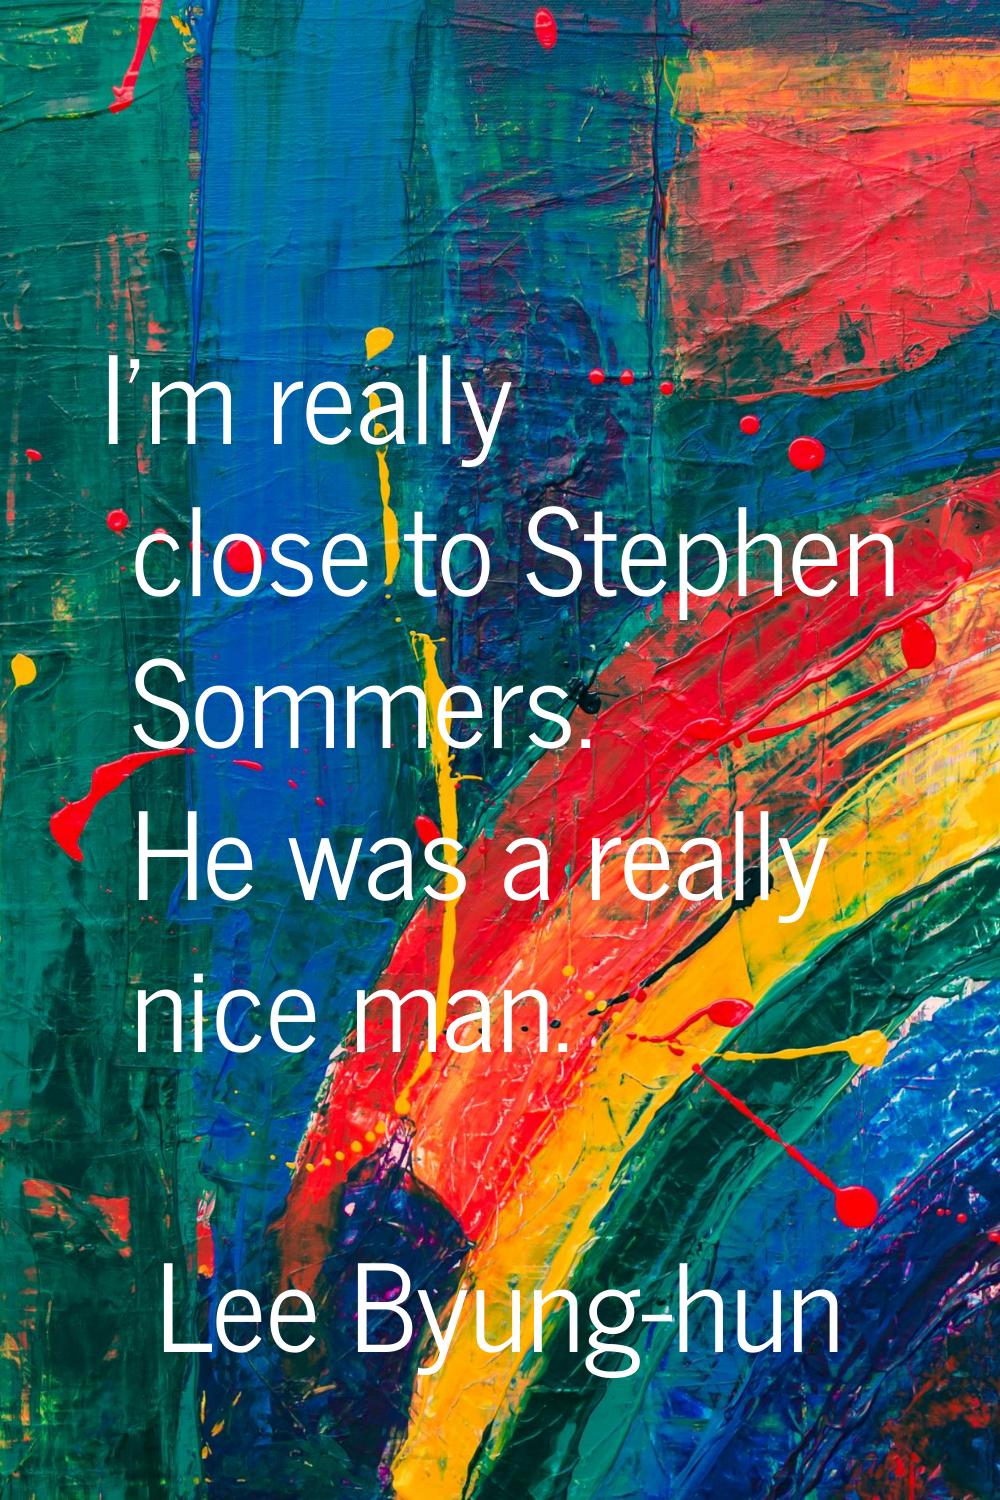 I'm really close to Stephen Sommers. He was a really nice man.